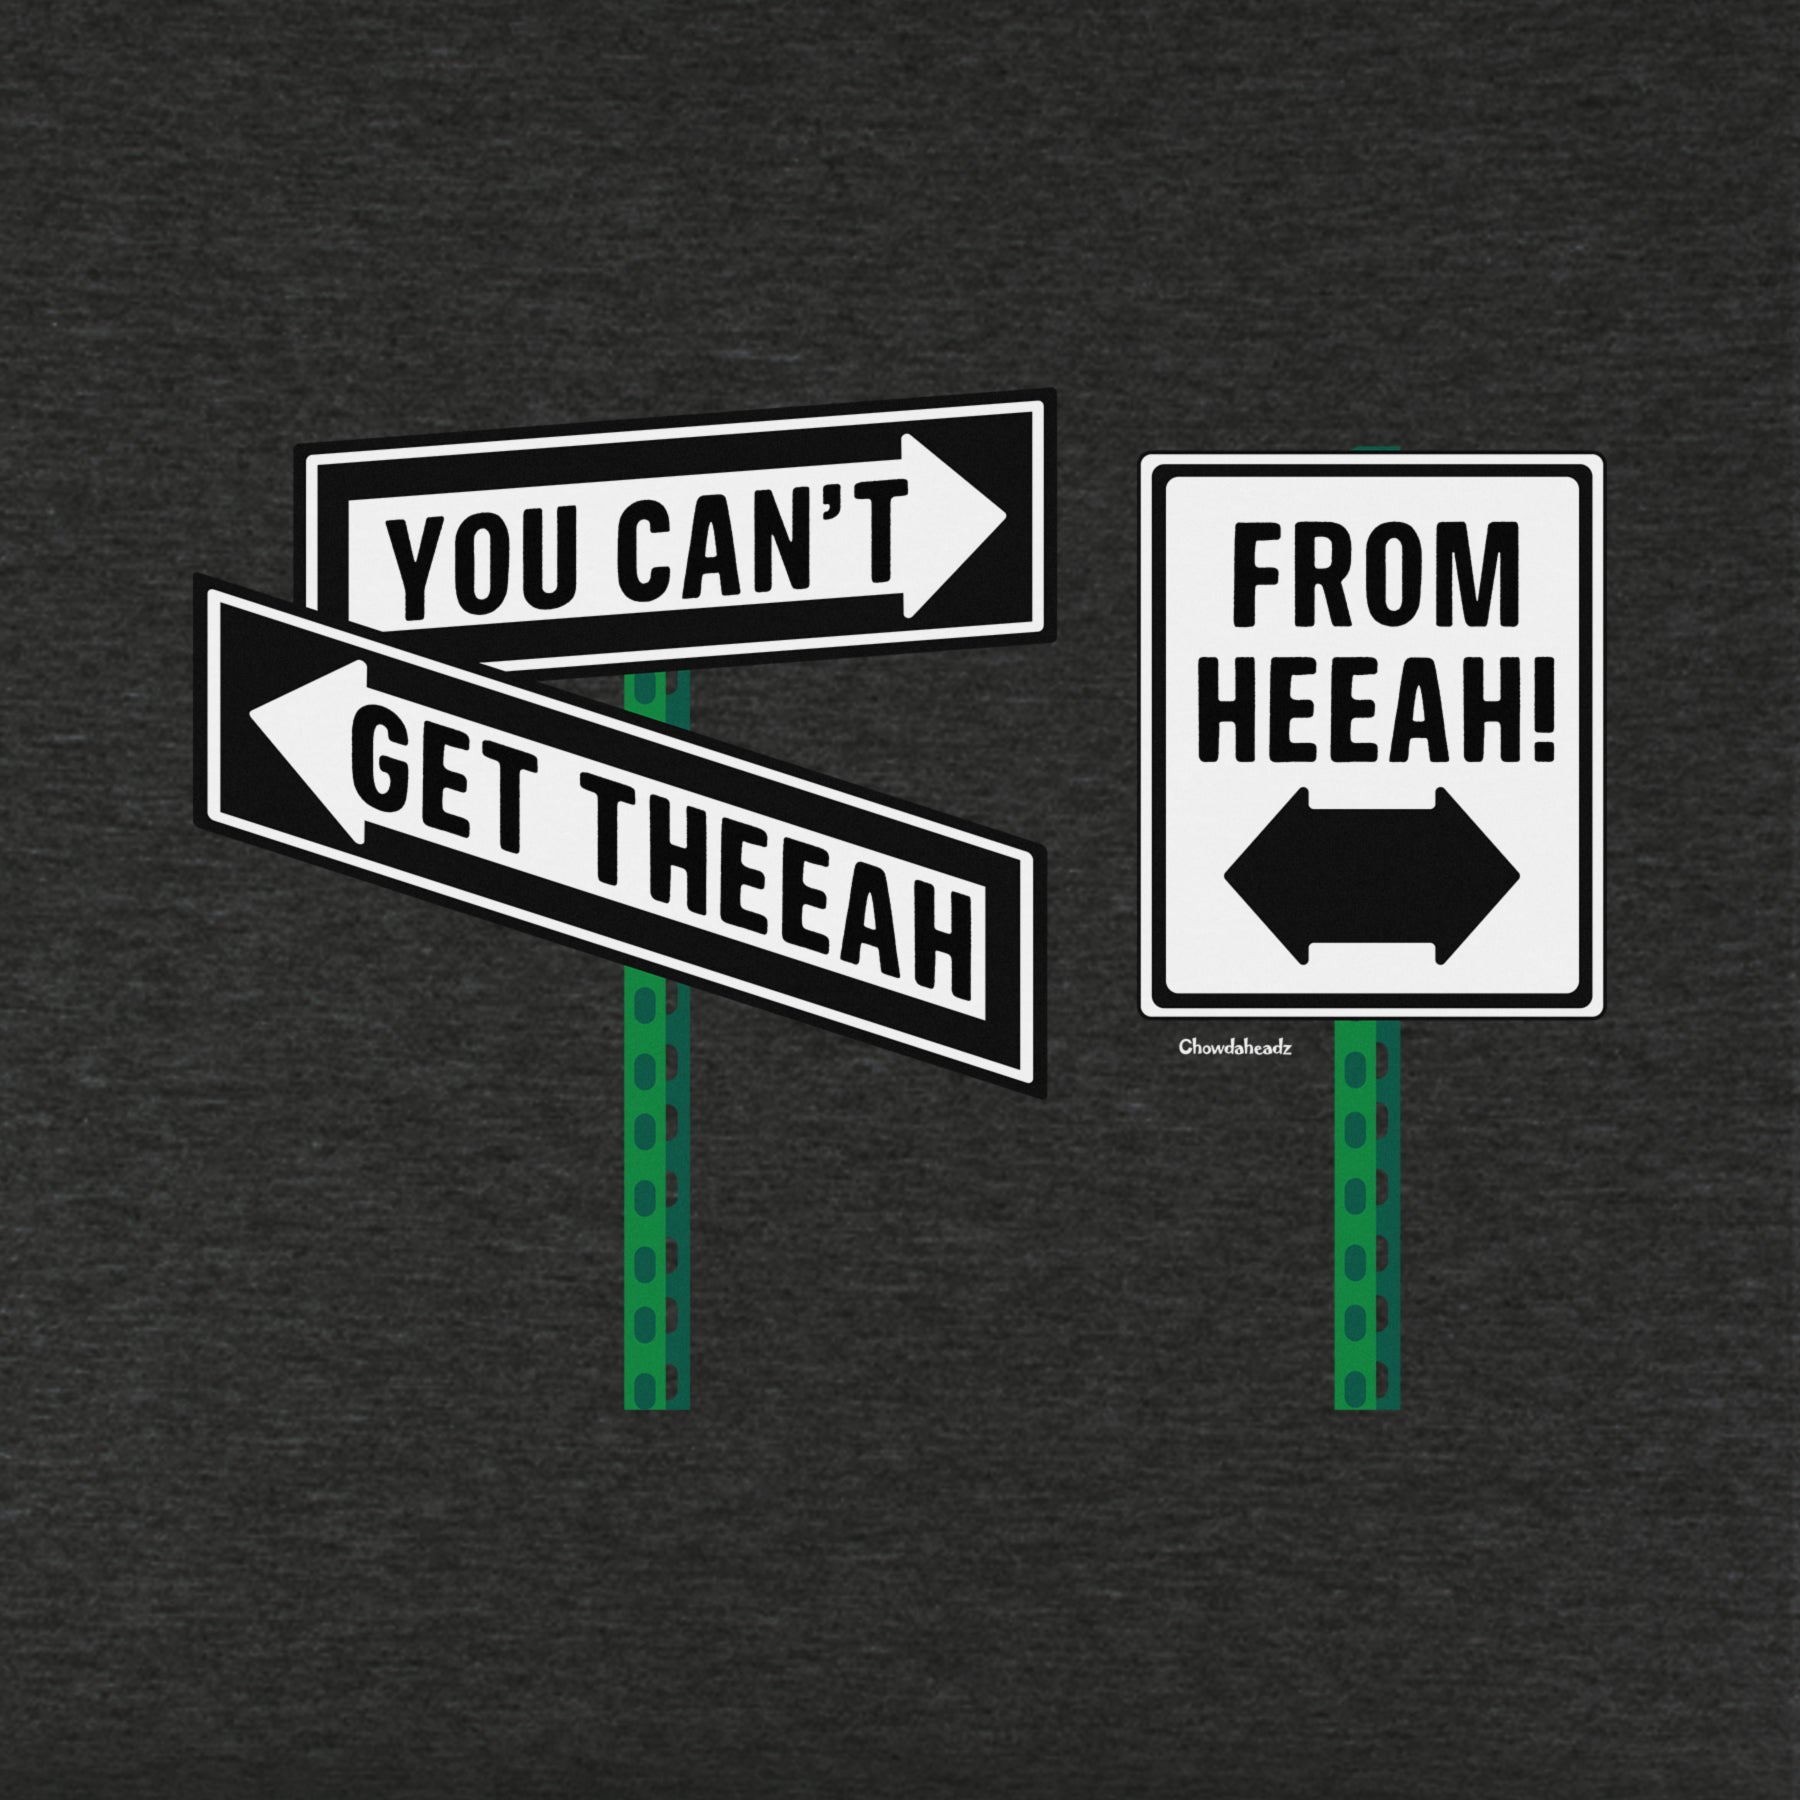 You Can't Get Theeah From Heeah! Youth T-Shirt - Chowdaheadz